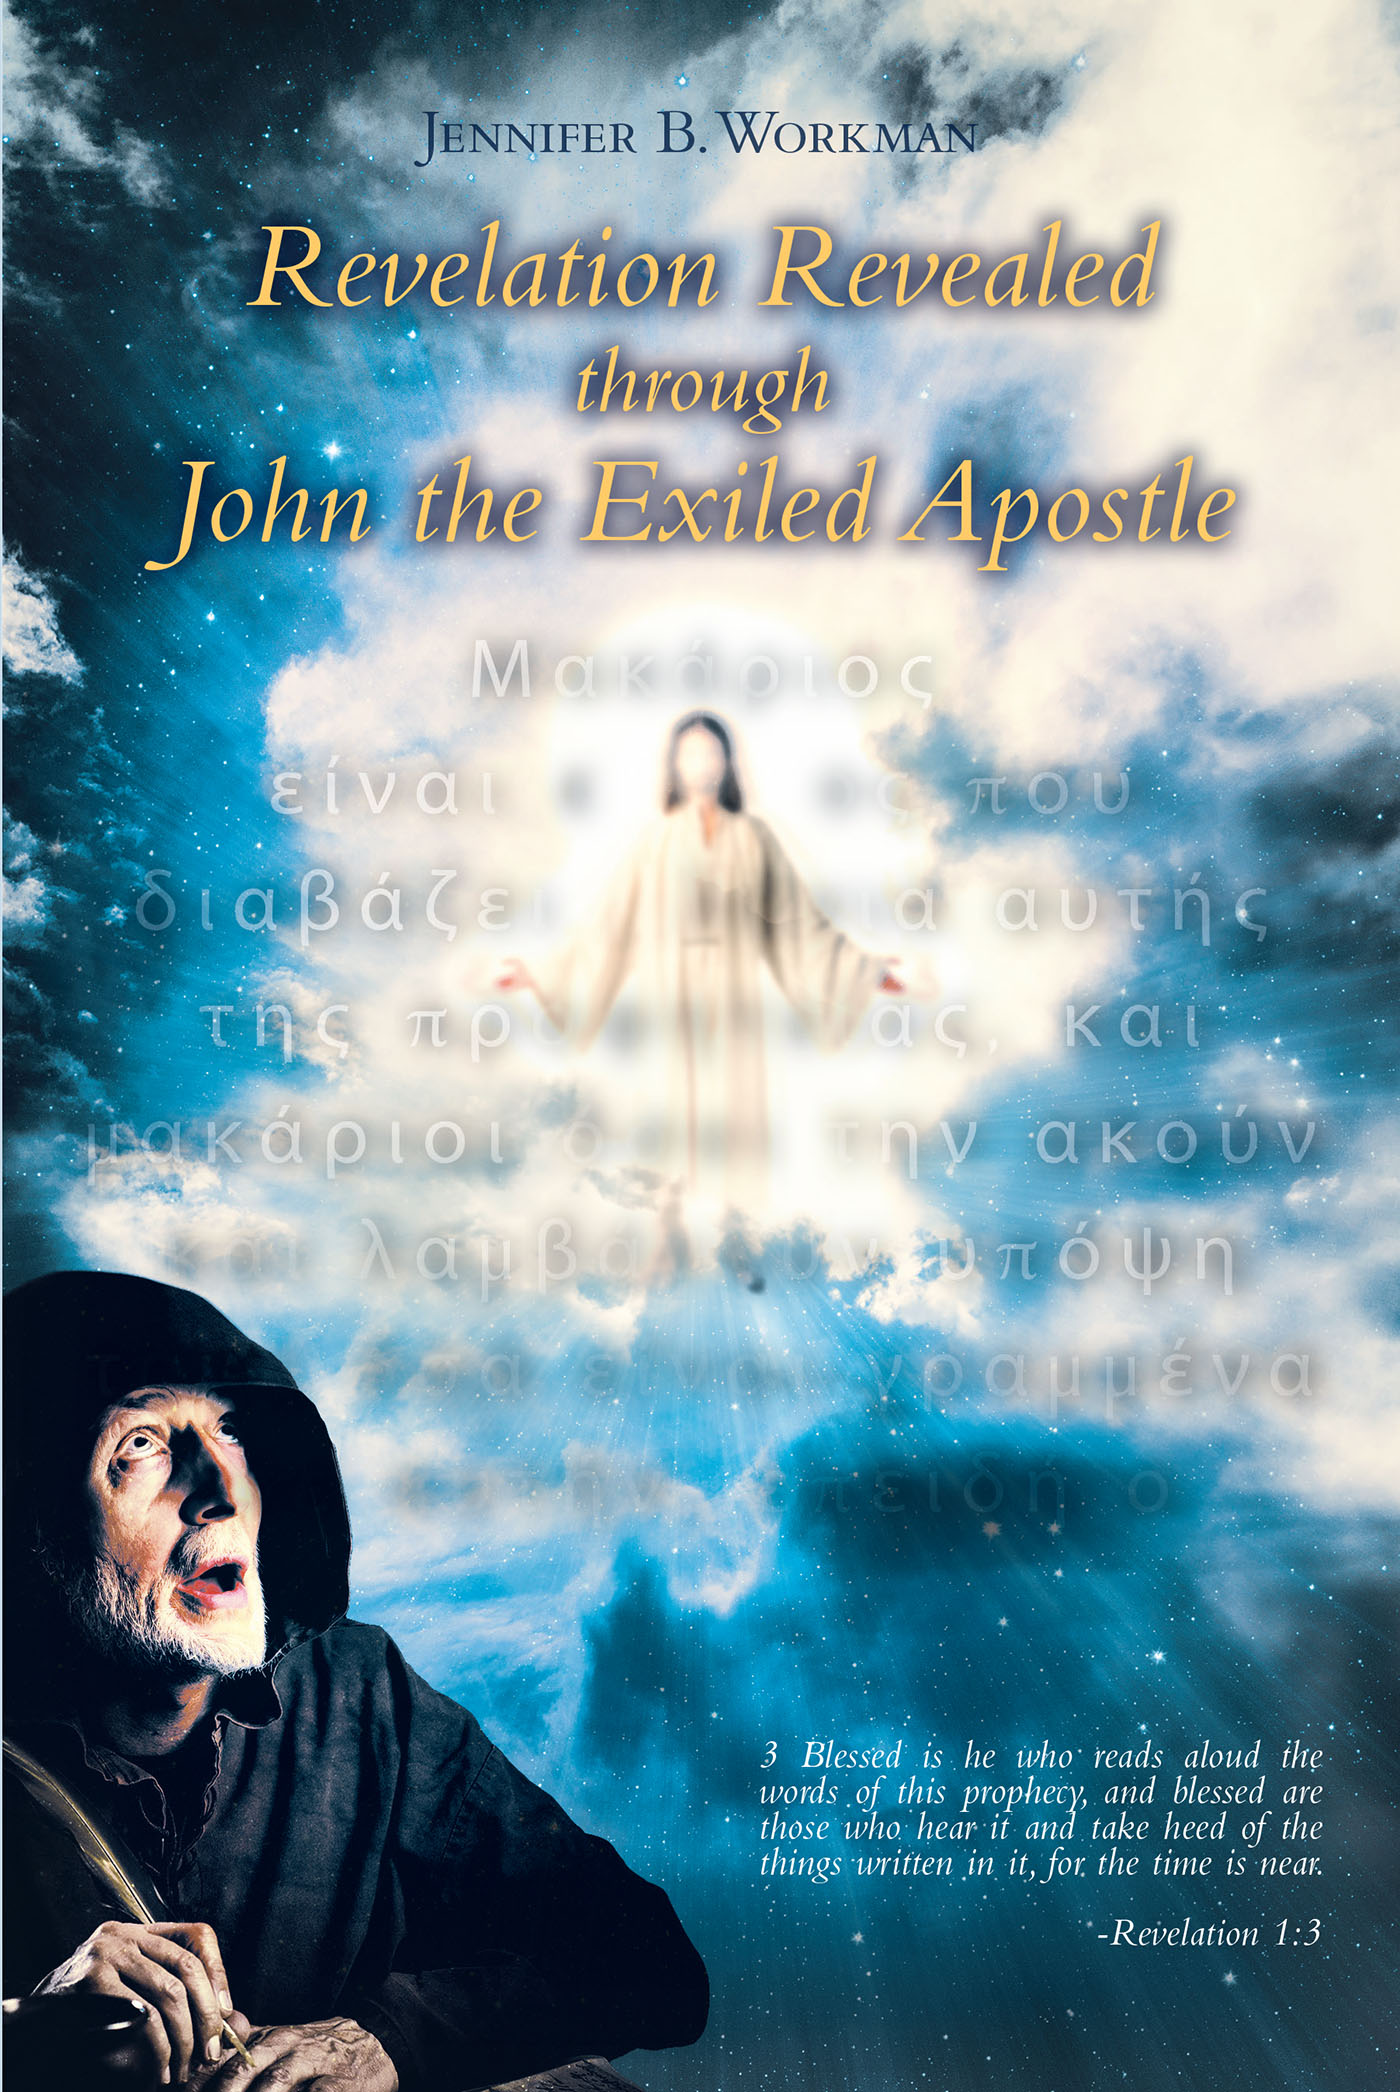 Jennifer B. Workman’s Newly Released “Revelation Revealed through John the Exiled Apostle” is a Thought-Provoking Examination of a Key Biblical Theme